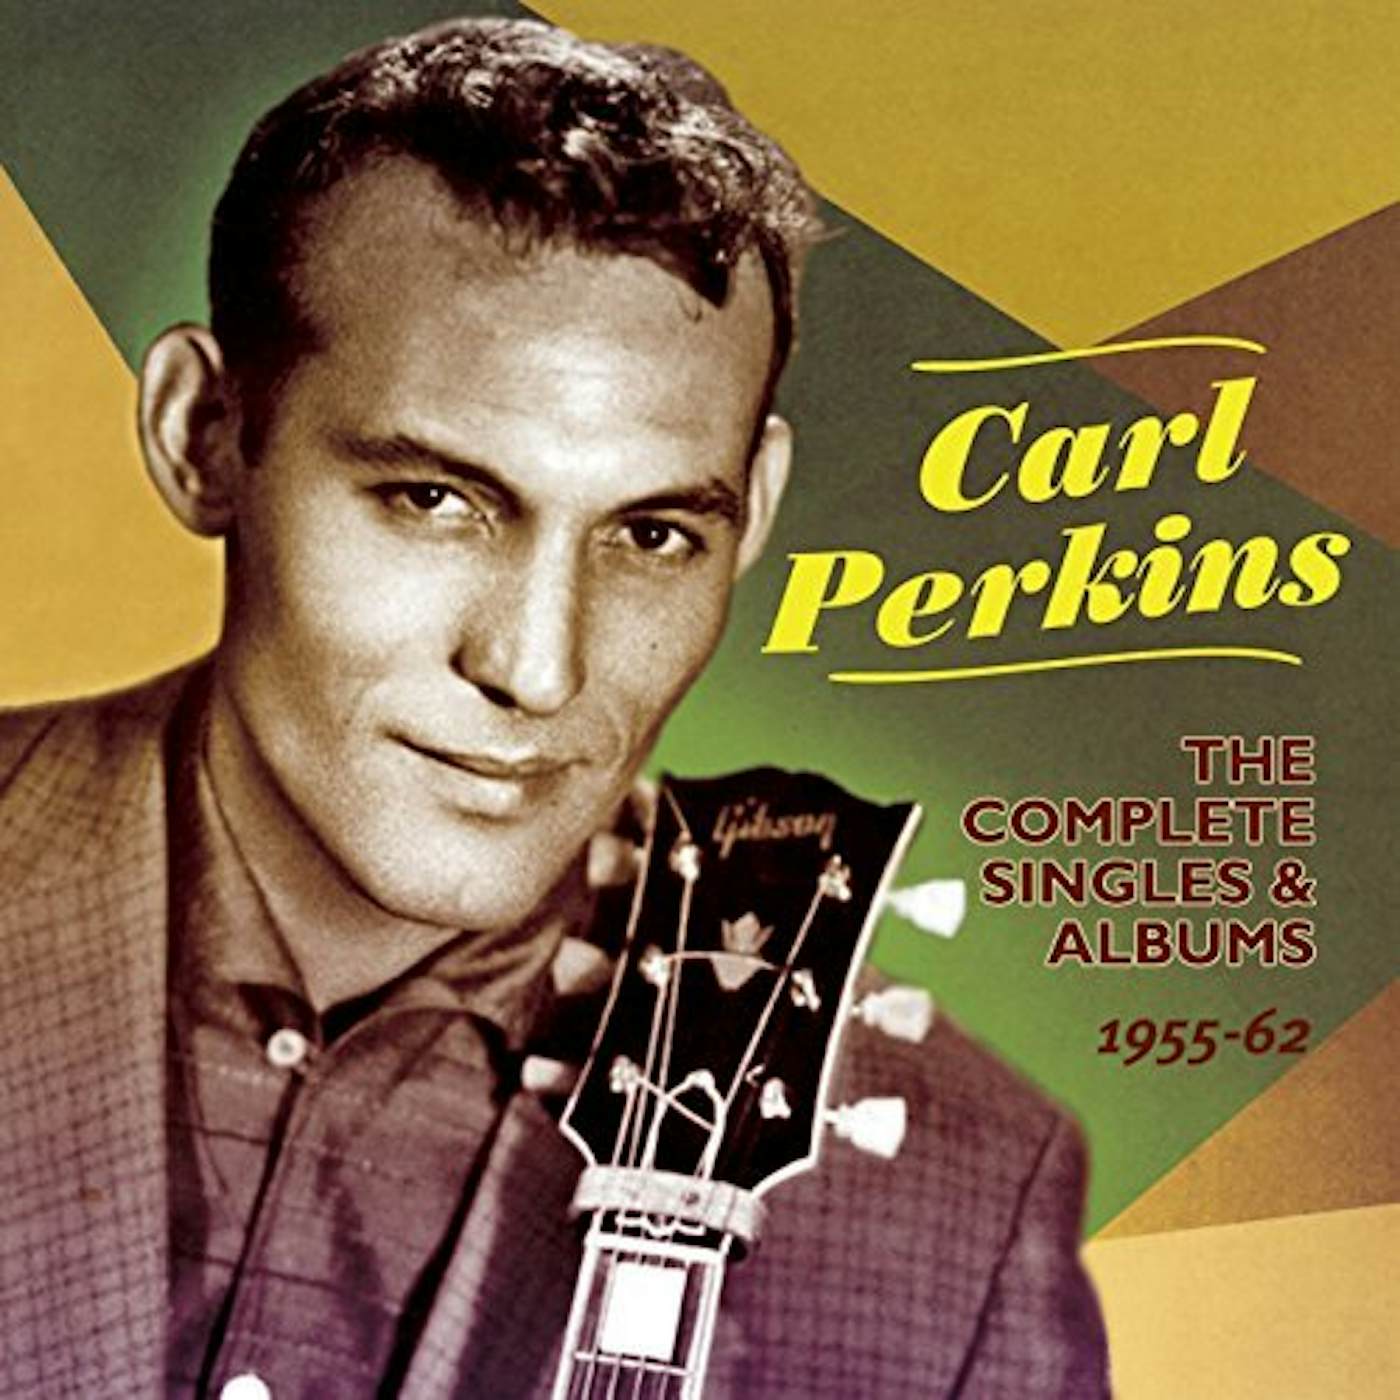 Carl Perkins COMPLETE SINGLES AND ALBUMS 1955-62 CD